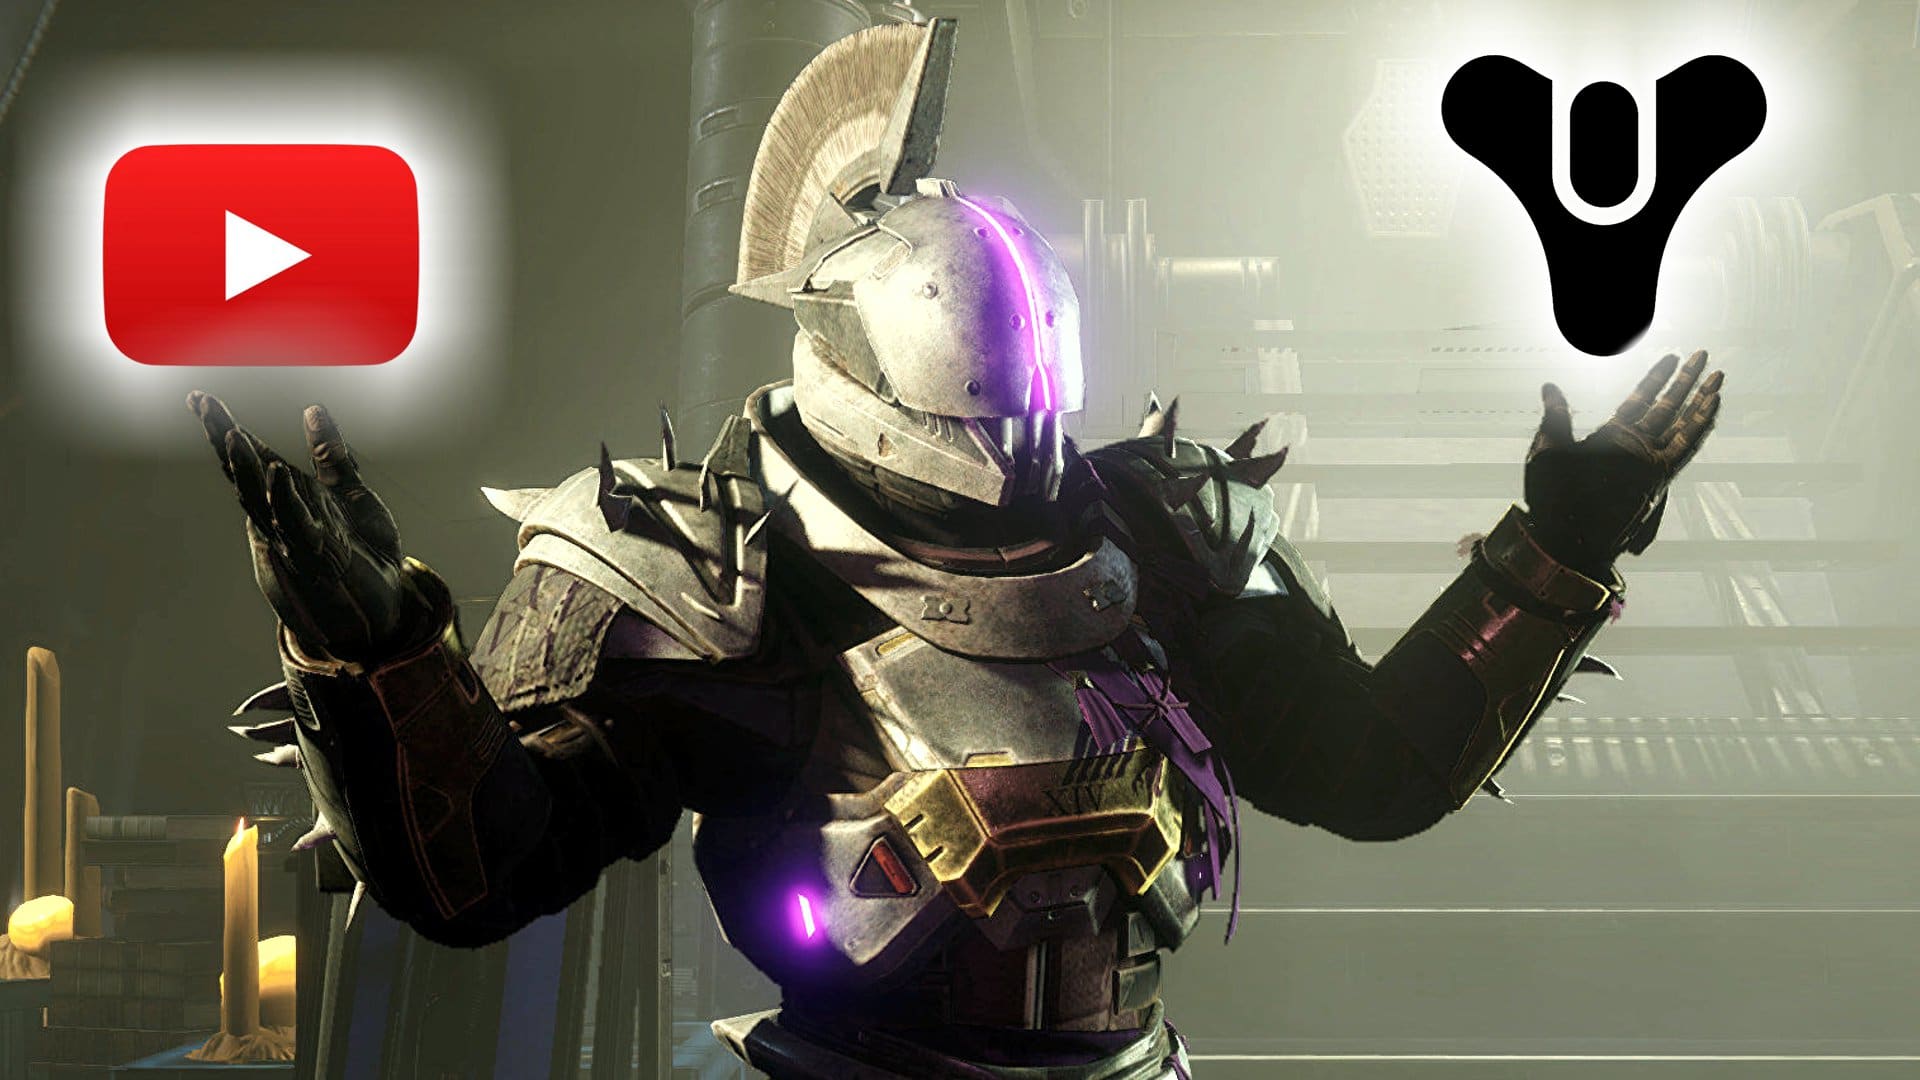 Destiny 2: YouTuber wants "revenge" on Bungie and harms the whole community - Now he is being sued for €7.2 million